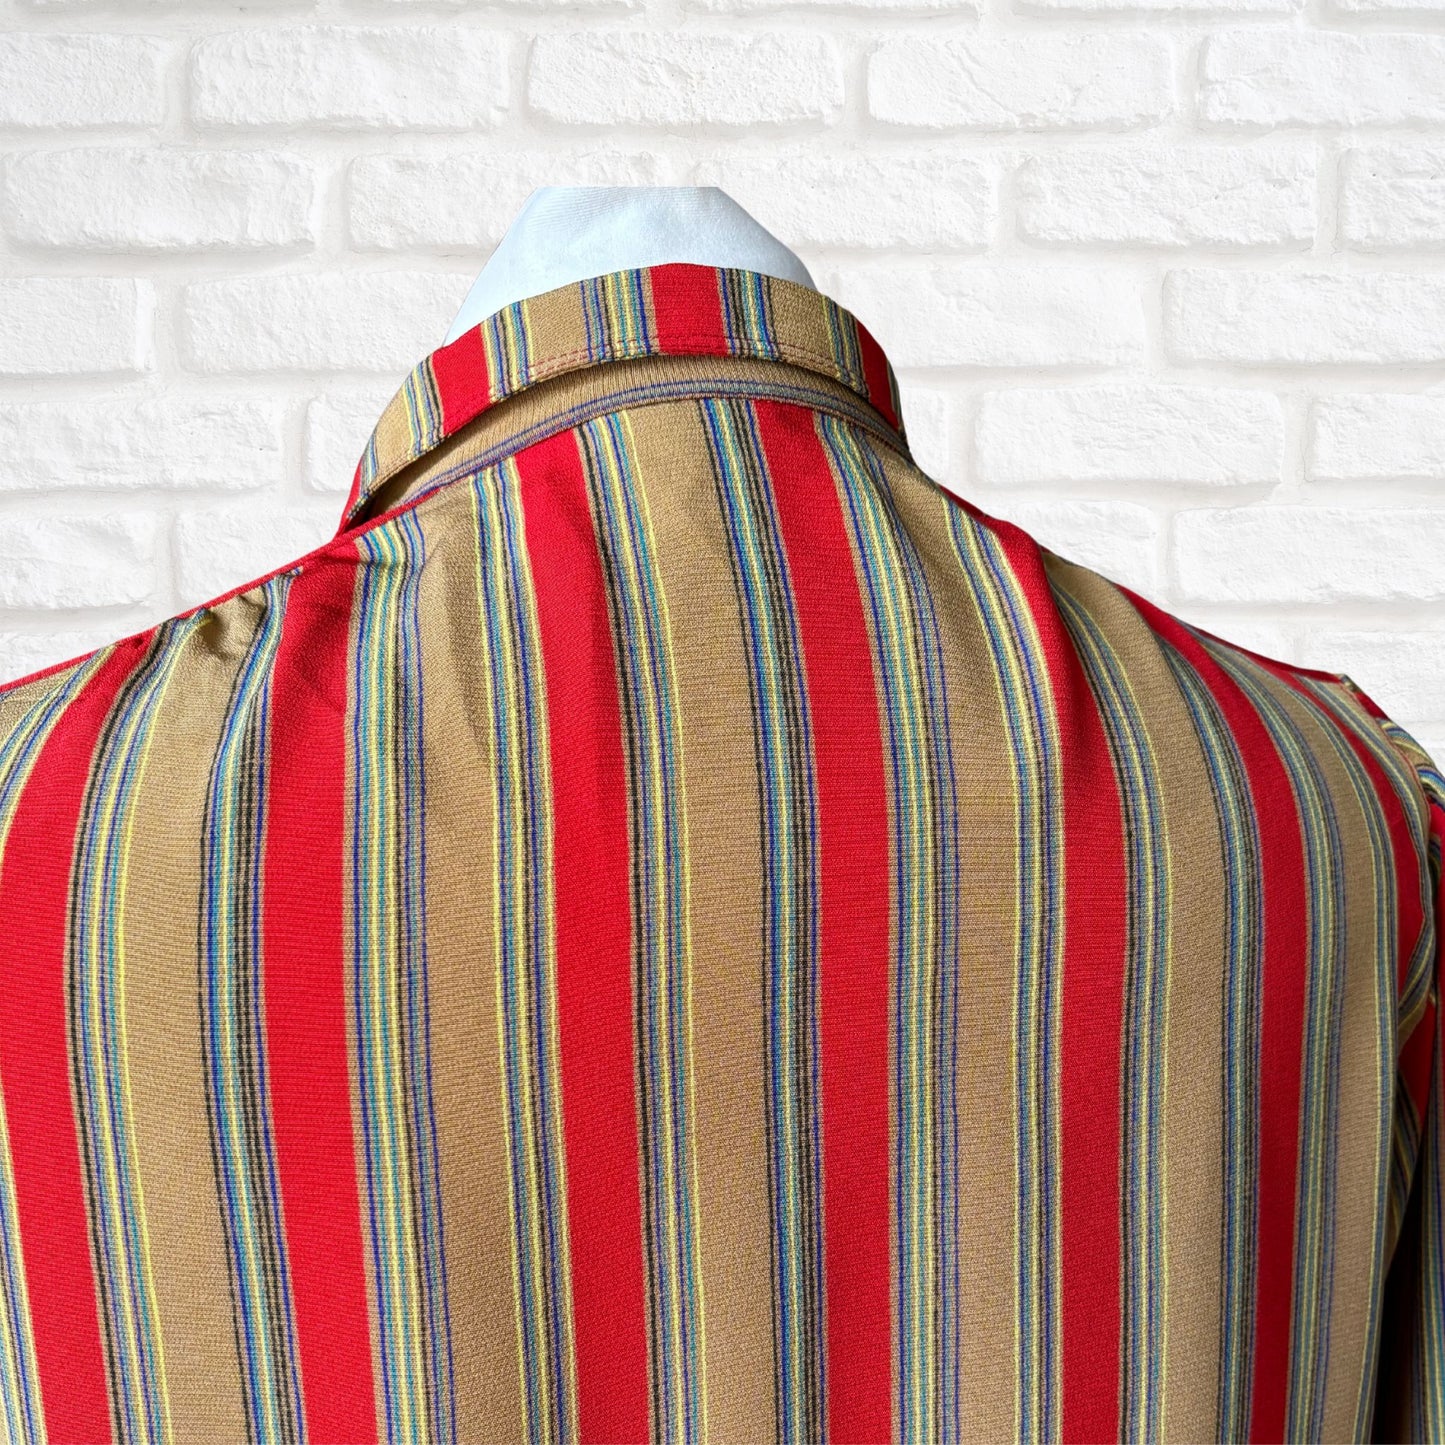 Vintage Dark Mustard and Red Striped Long-Sleeved Blouse with small straight collar .Approx UK size 8-12